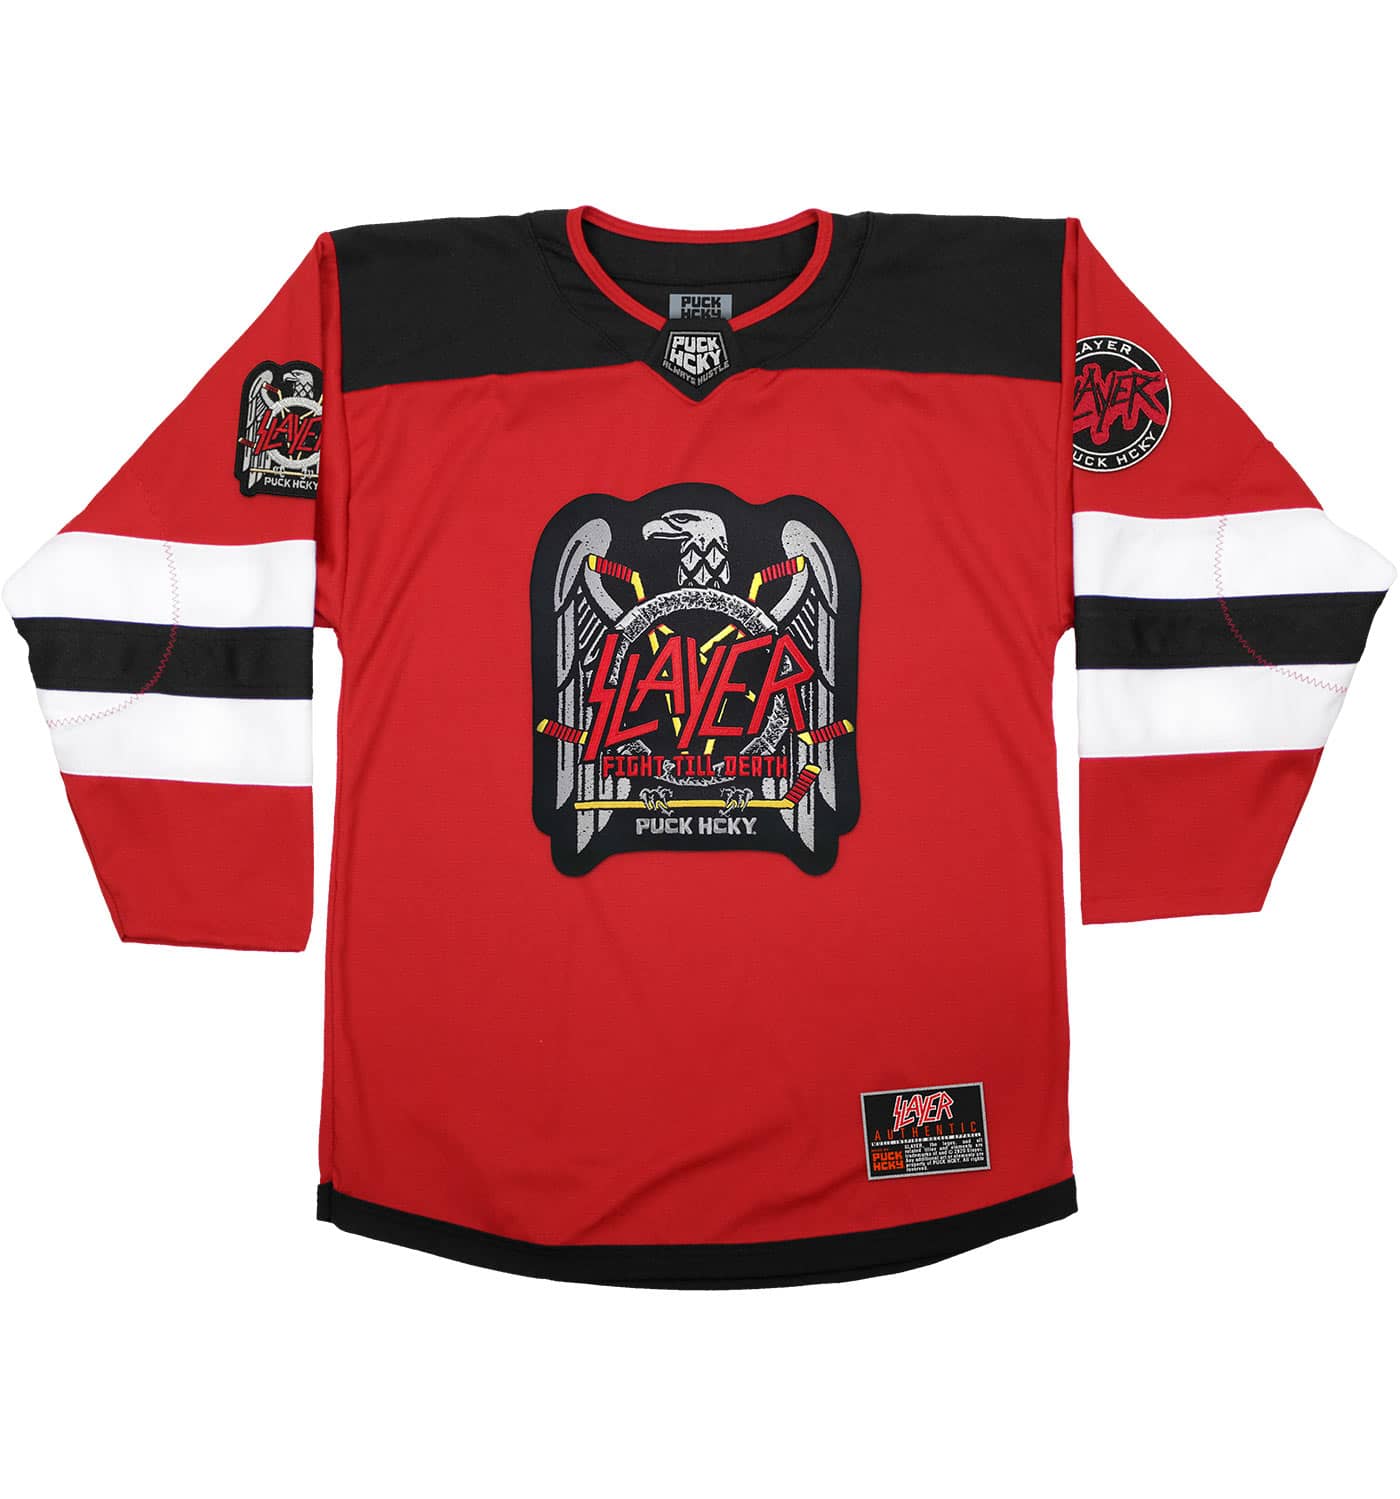 SLAYER 'FIGHT TILL DEATH' deluxe hockey jersey in red, black, and white front view